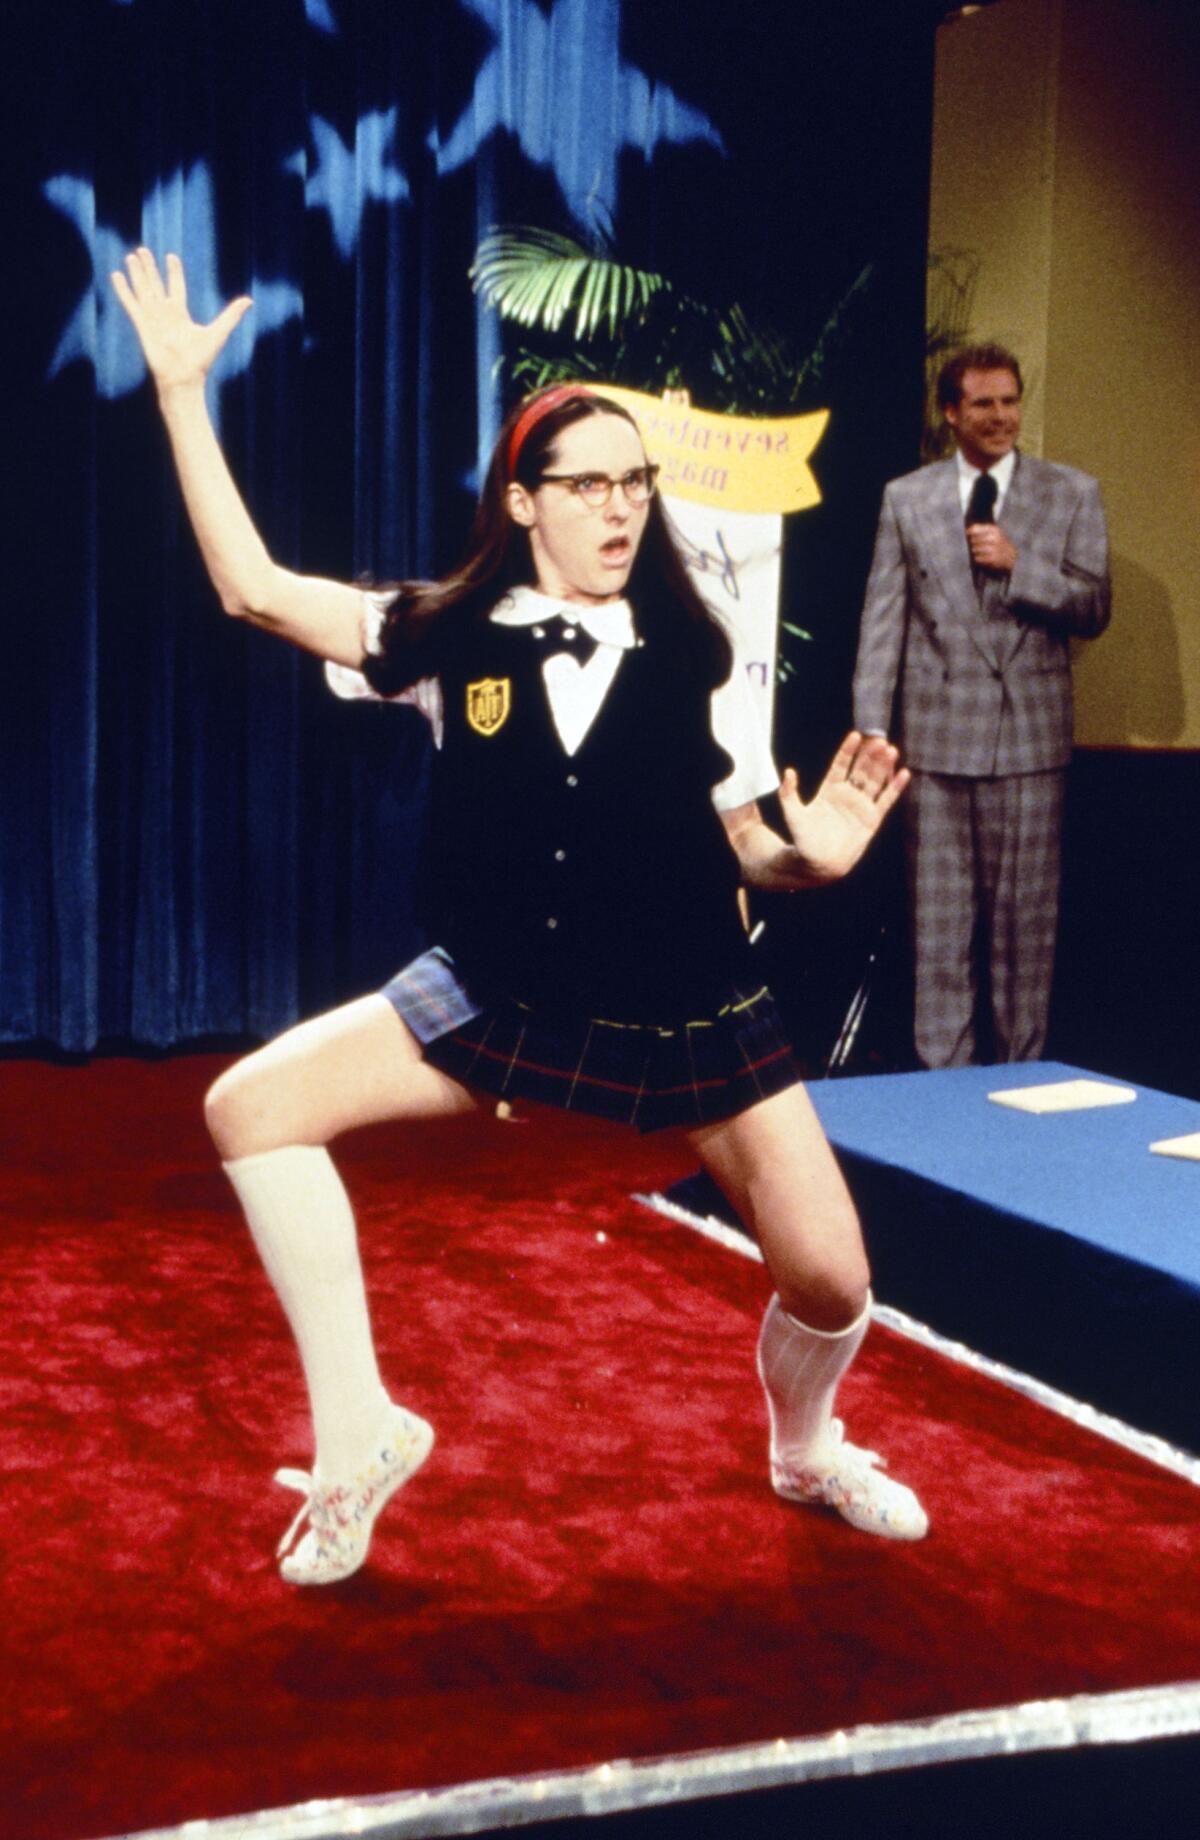 Molly Shannon as Mary Katherine Gallaher, Will Ferrell